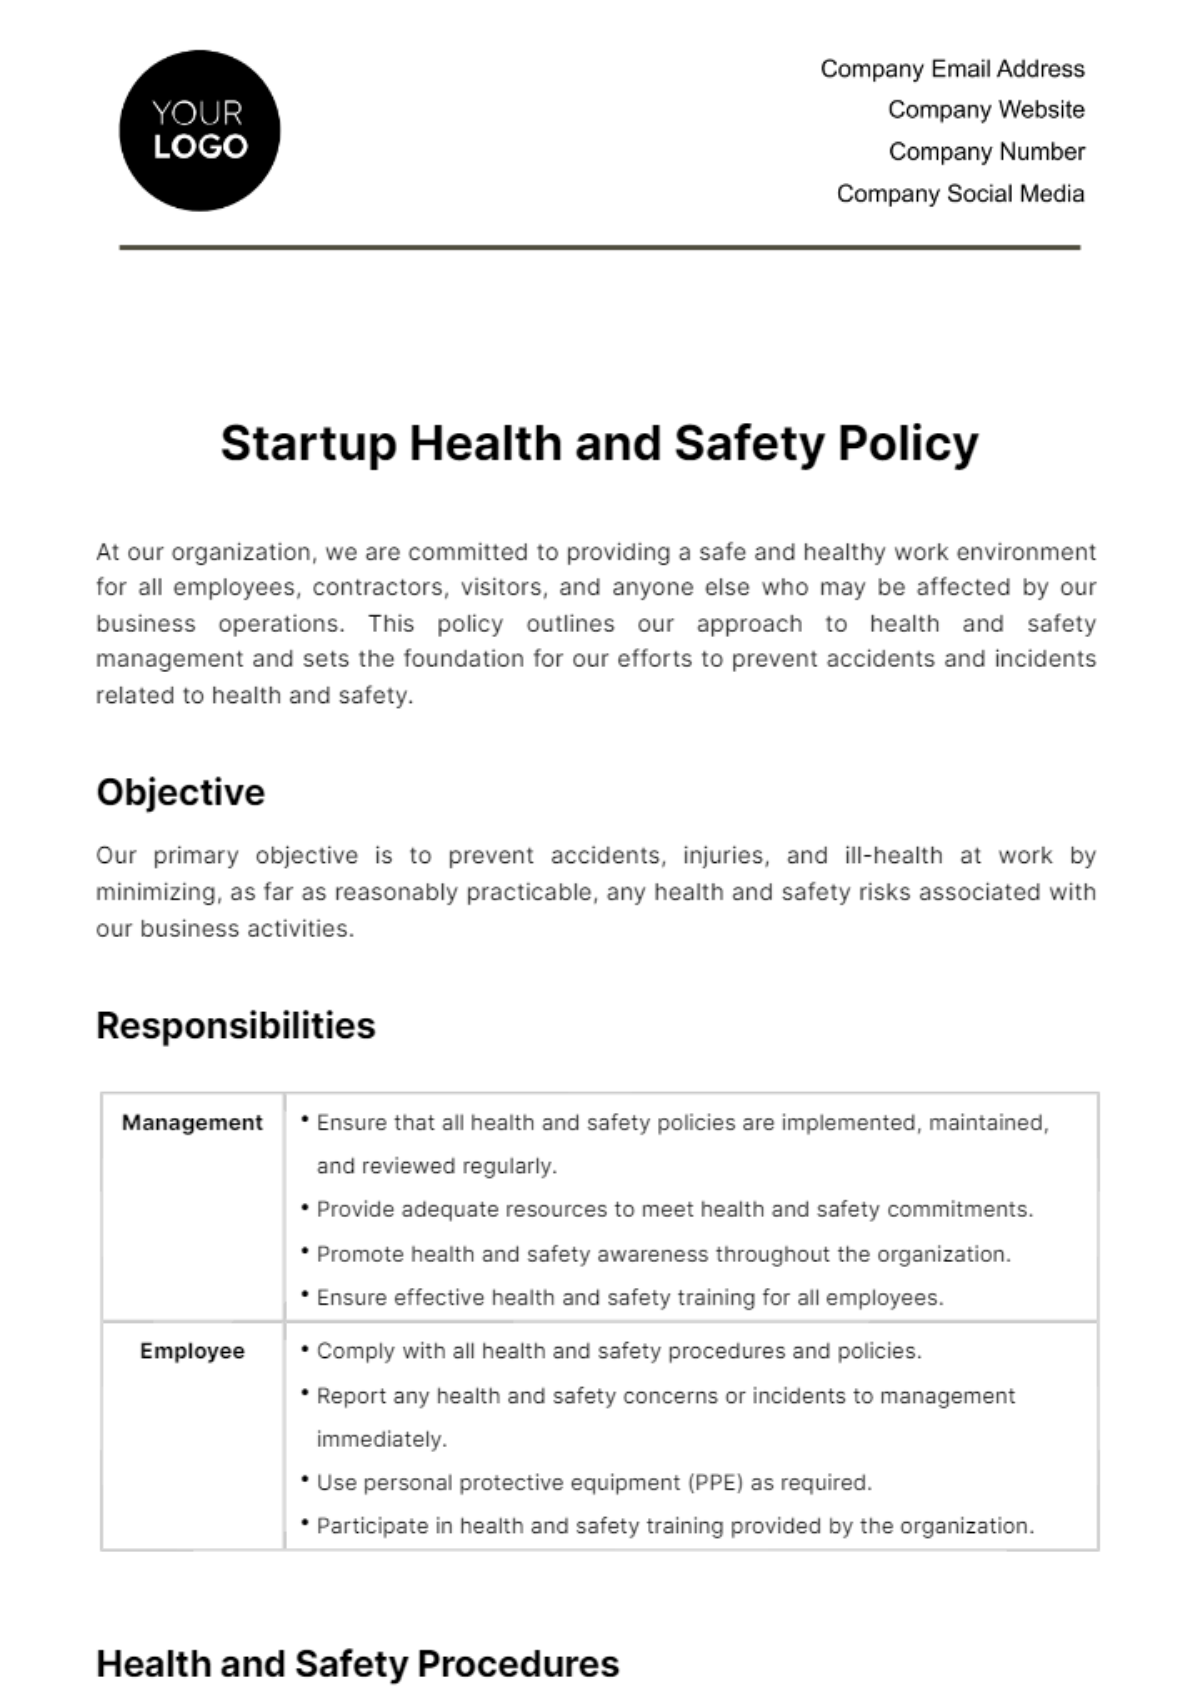 Free Startup Health and Safety Policy Template